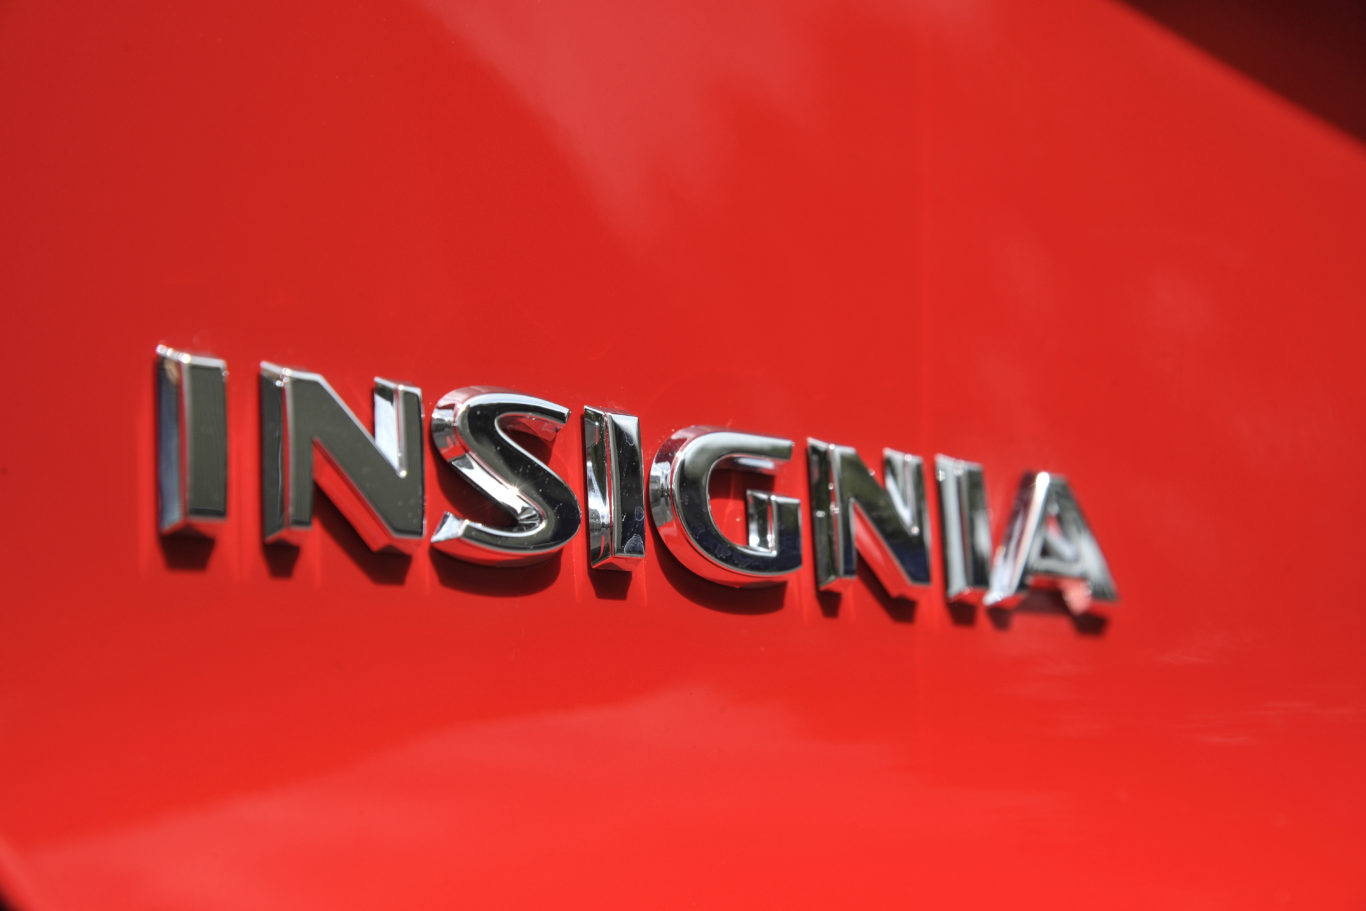 The Insignia replaces the Vectra in the Vauxhall range